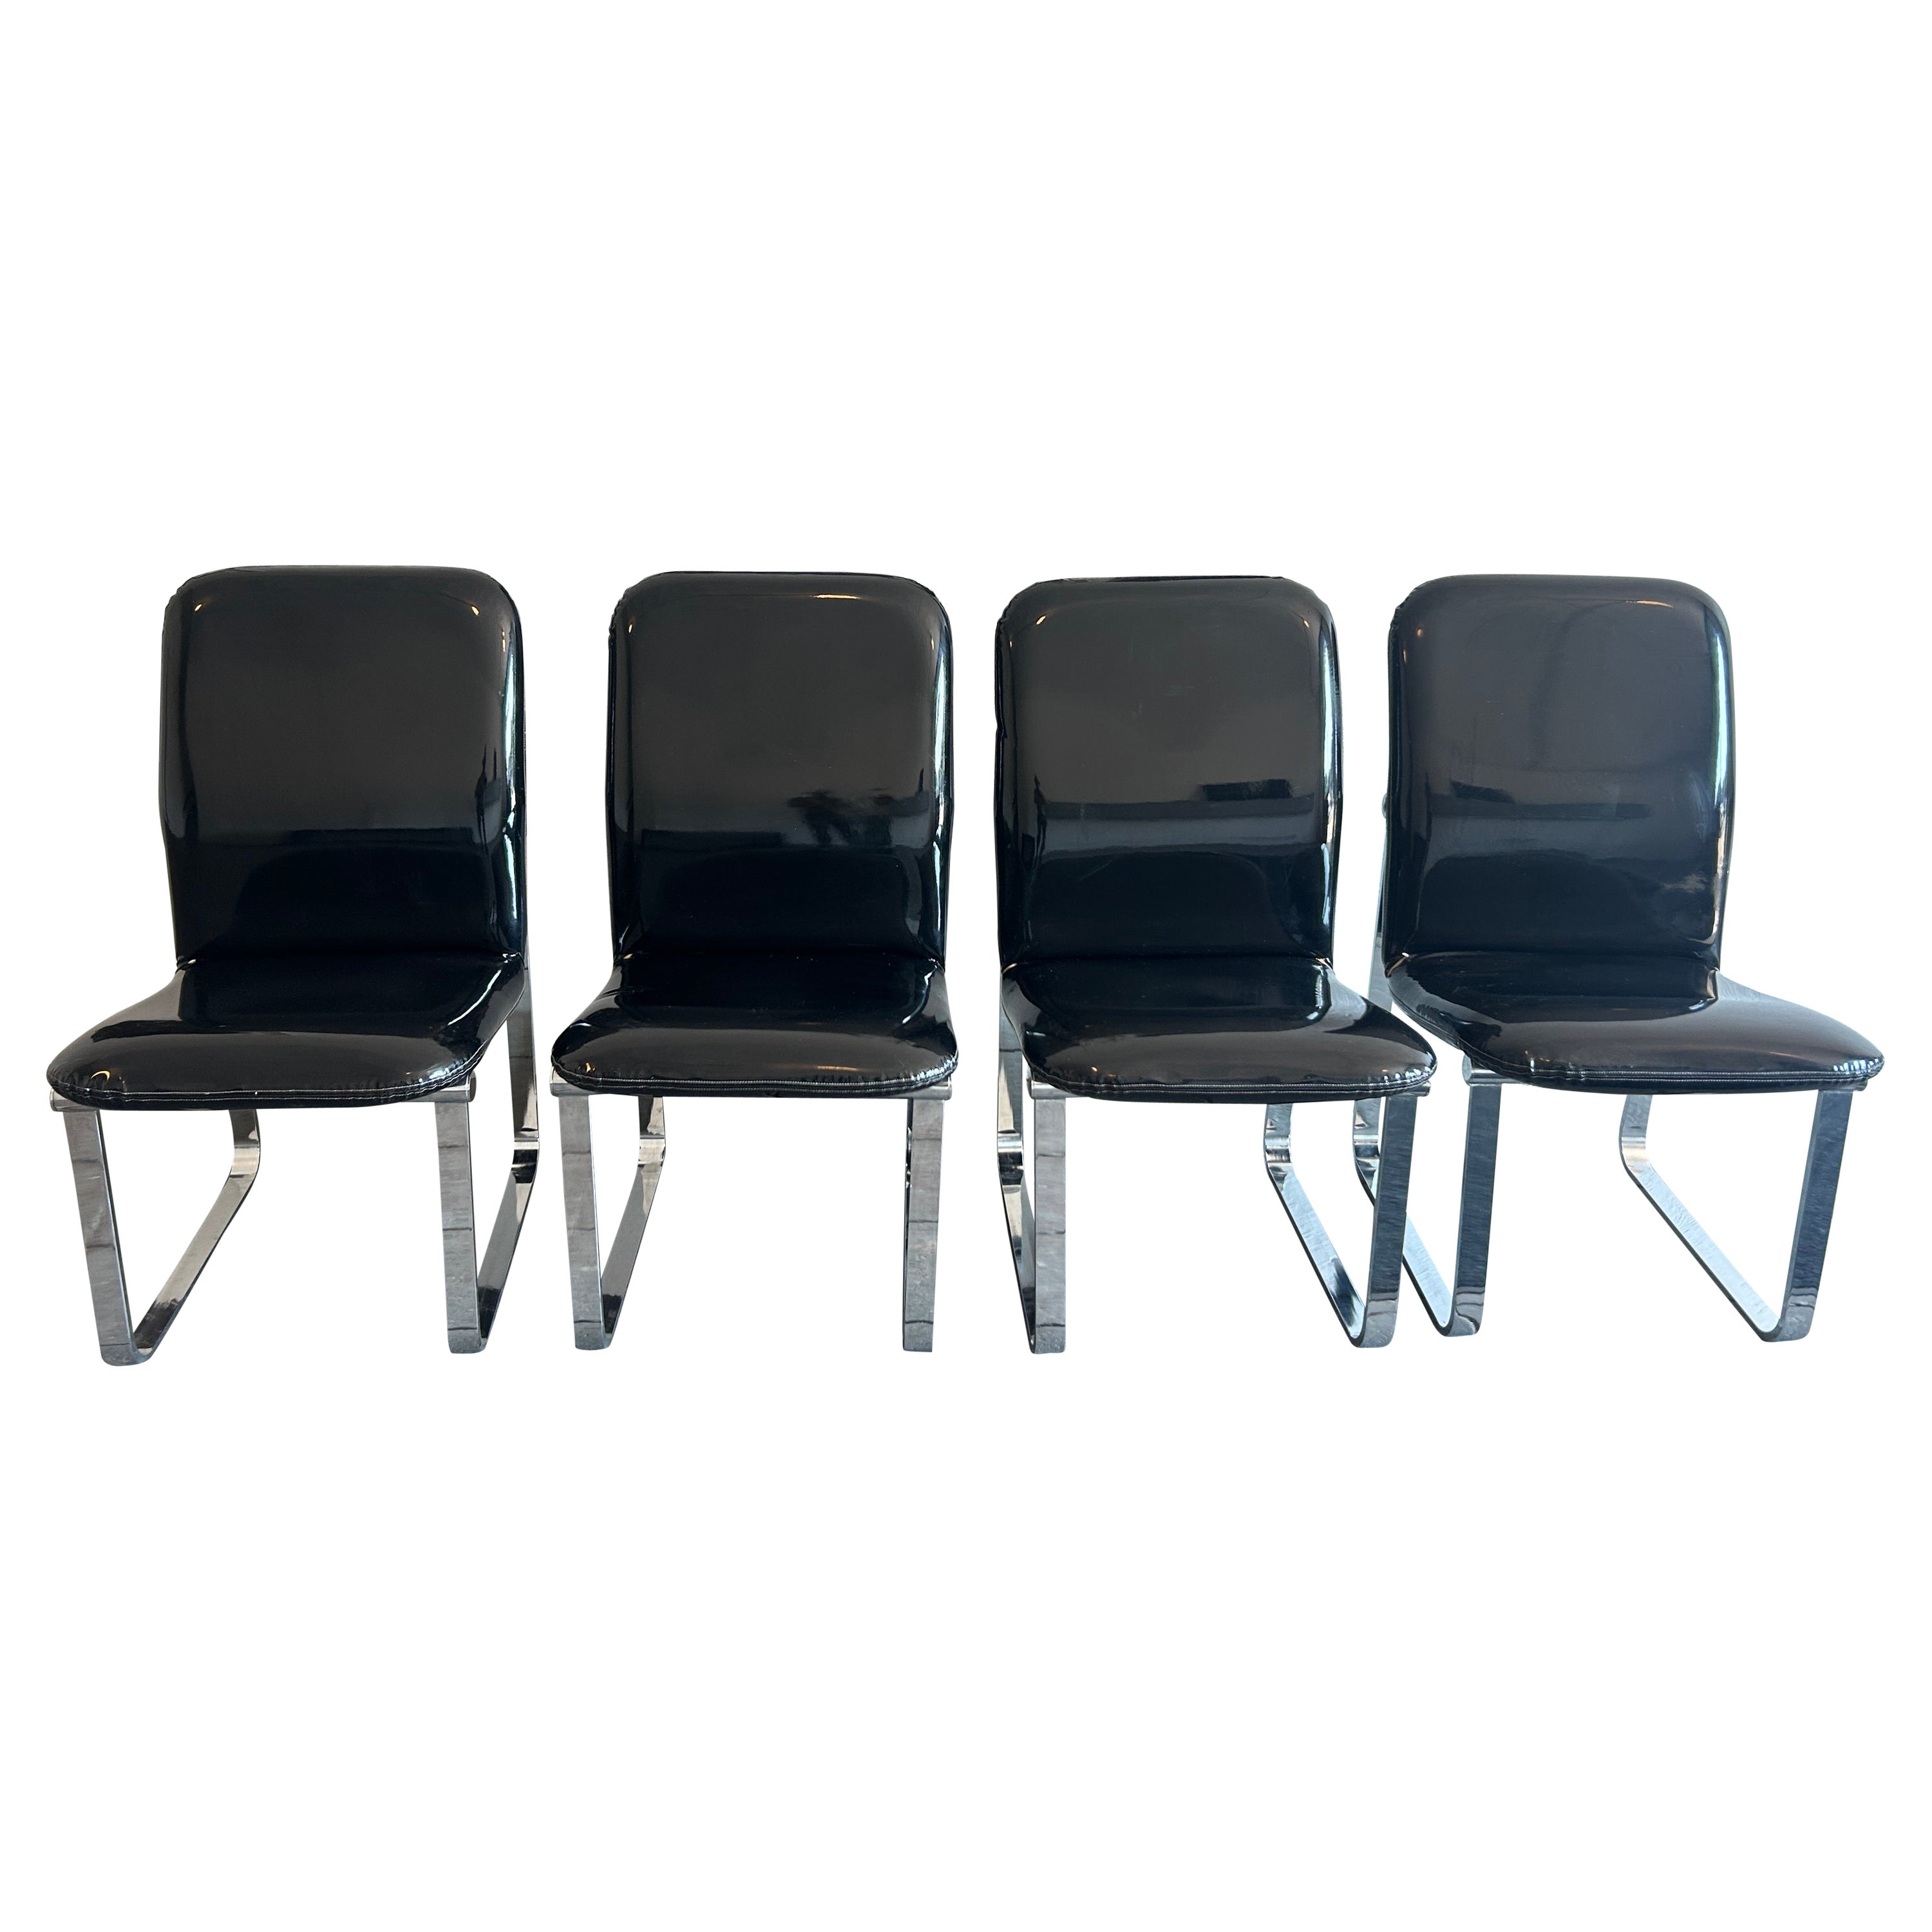 (4) Mid century post modern Black Glossy Faux Patent Leather chrome chairs  DIA For Sale